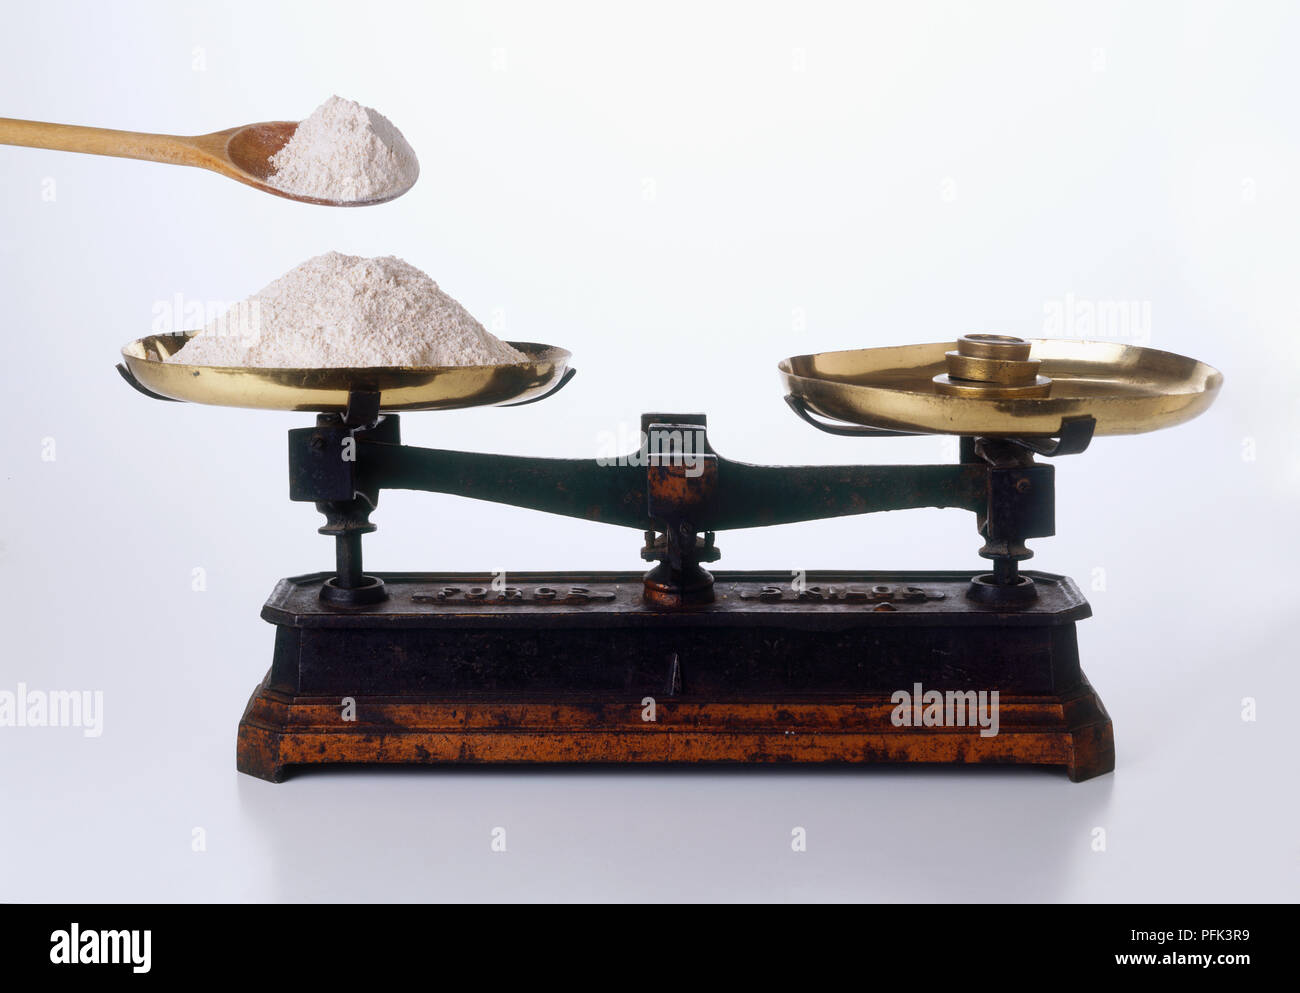 https://c8.alamy.com/comp/PFK3R9/pile-of-flour-balanced-against-weights-on-old-fashioned-scales-PFK3R9.jpg